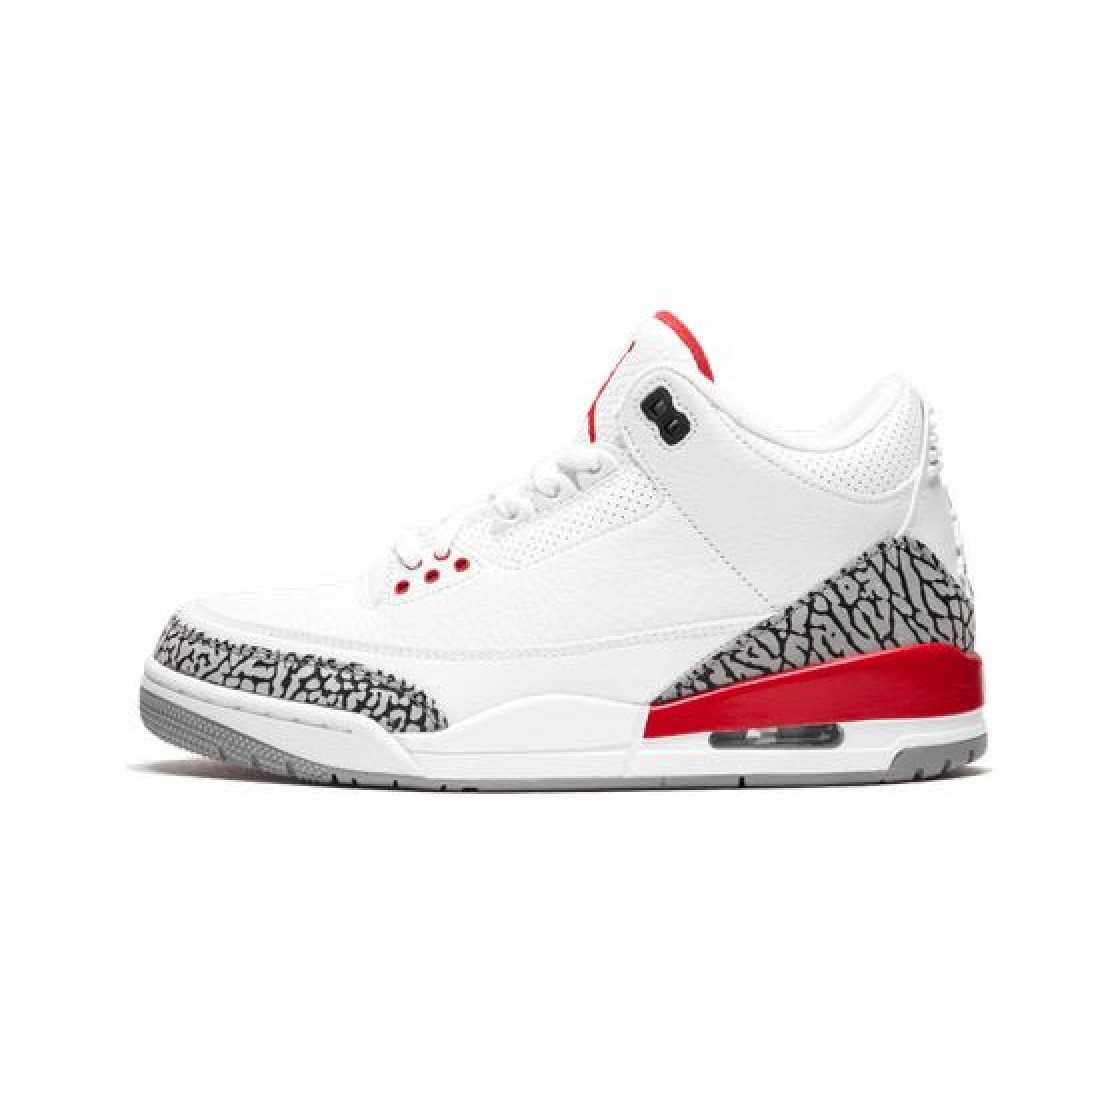 Cheap Air Jordans 3 Retro Hall of Fame WHITE/FIRE RED-CEMENT GREY Mens ...